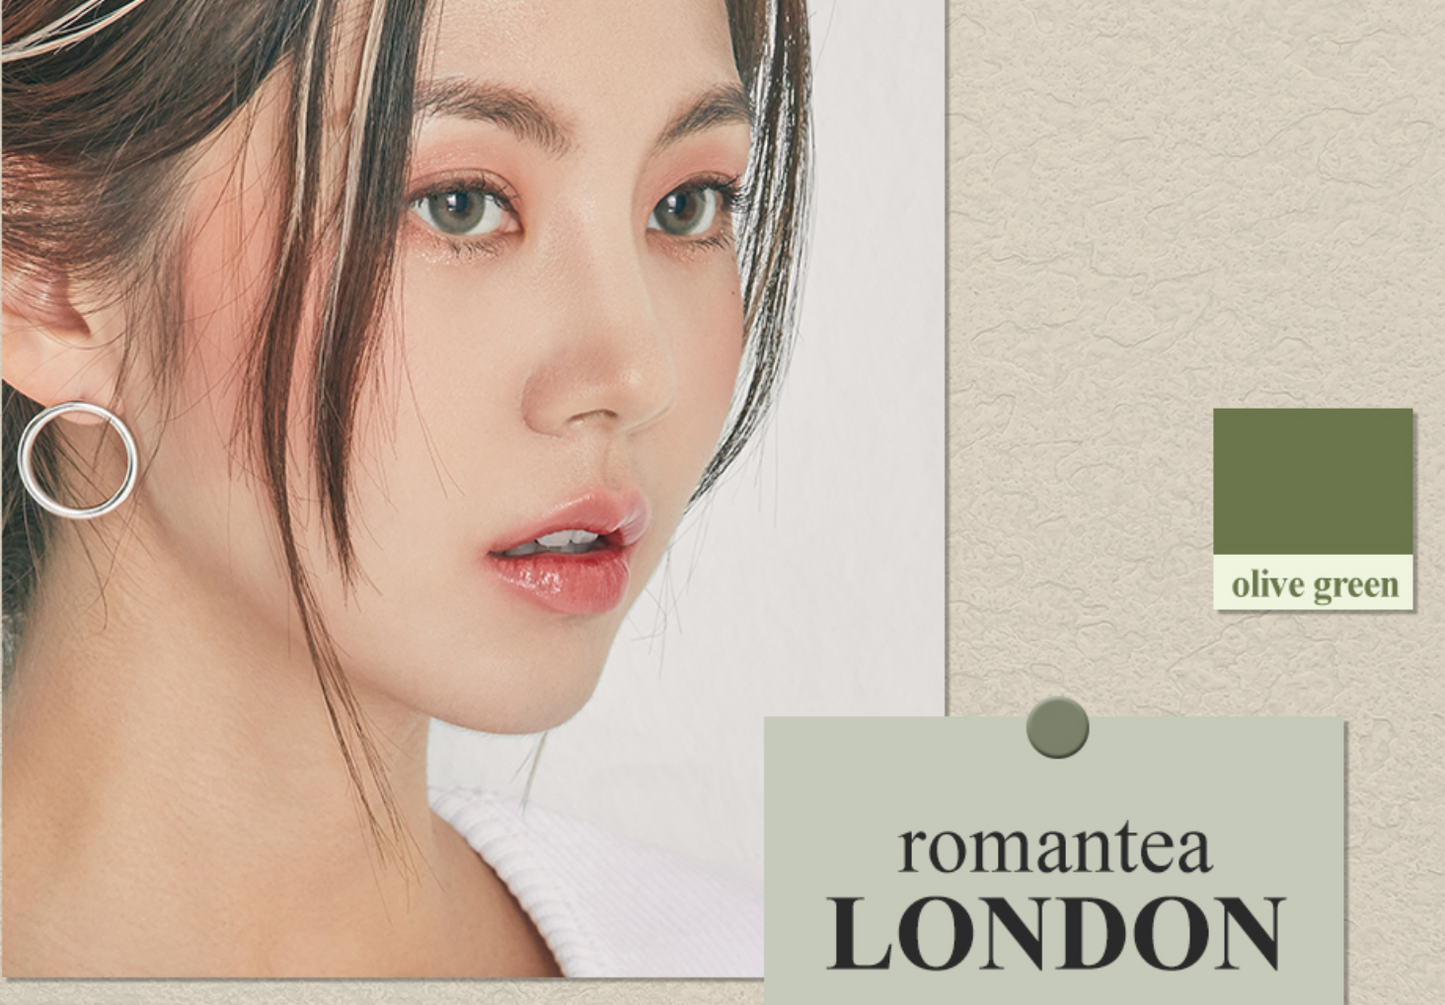 [Order payment] LENSTOWN ROMANTIC LONDON 1DAY - OLIVE GREEN daily disposable/10 tablets 